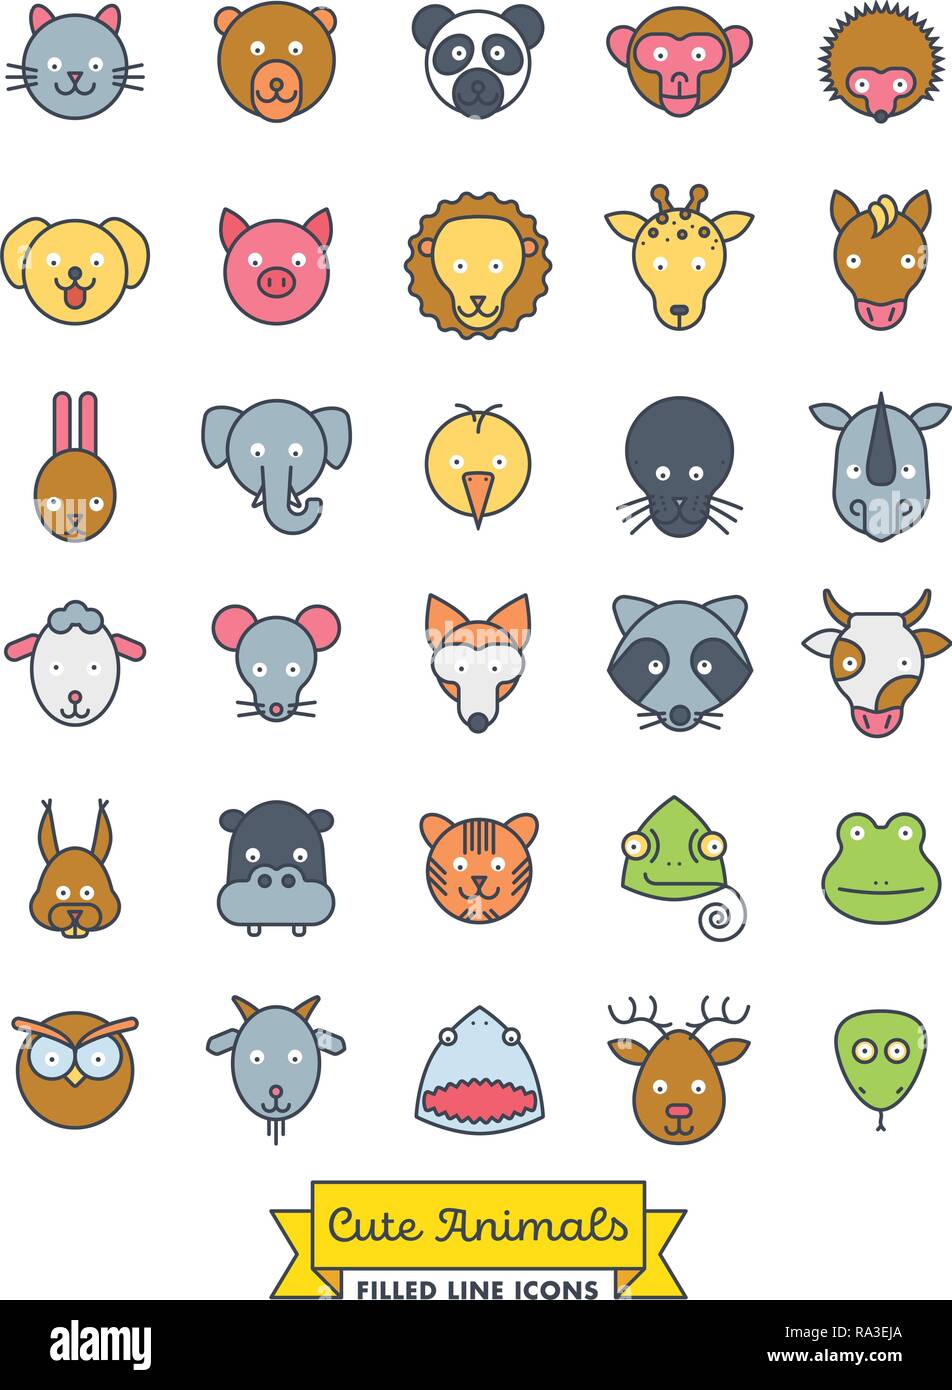 The Cutest cute animal symbols Illustrations and Icons